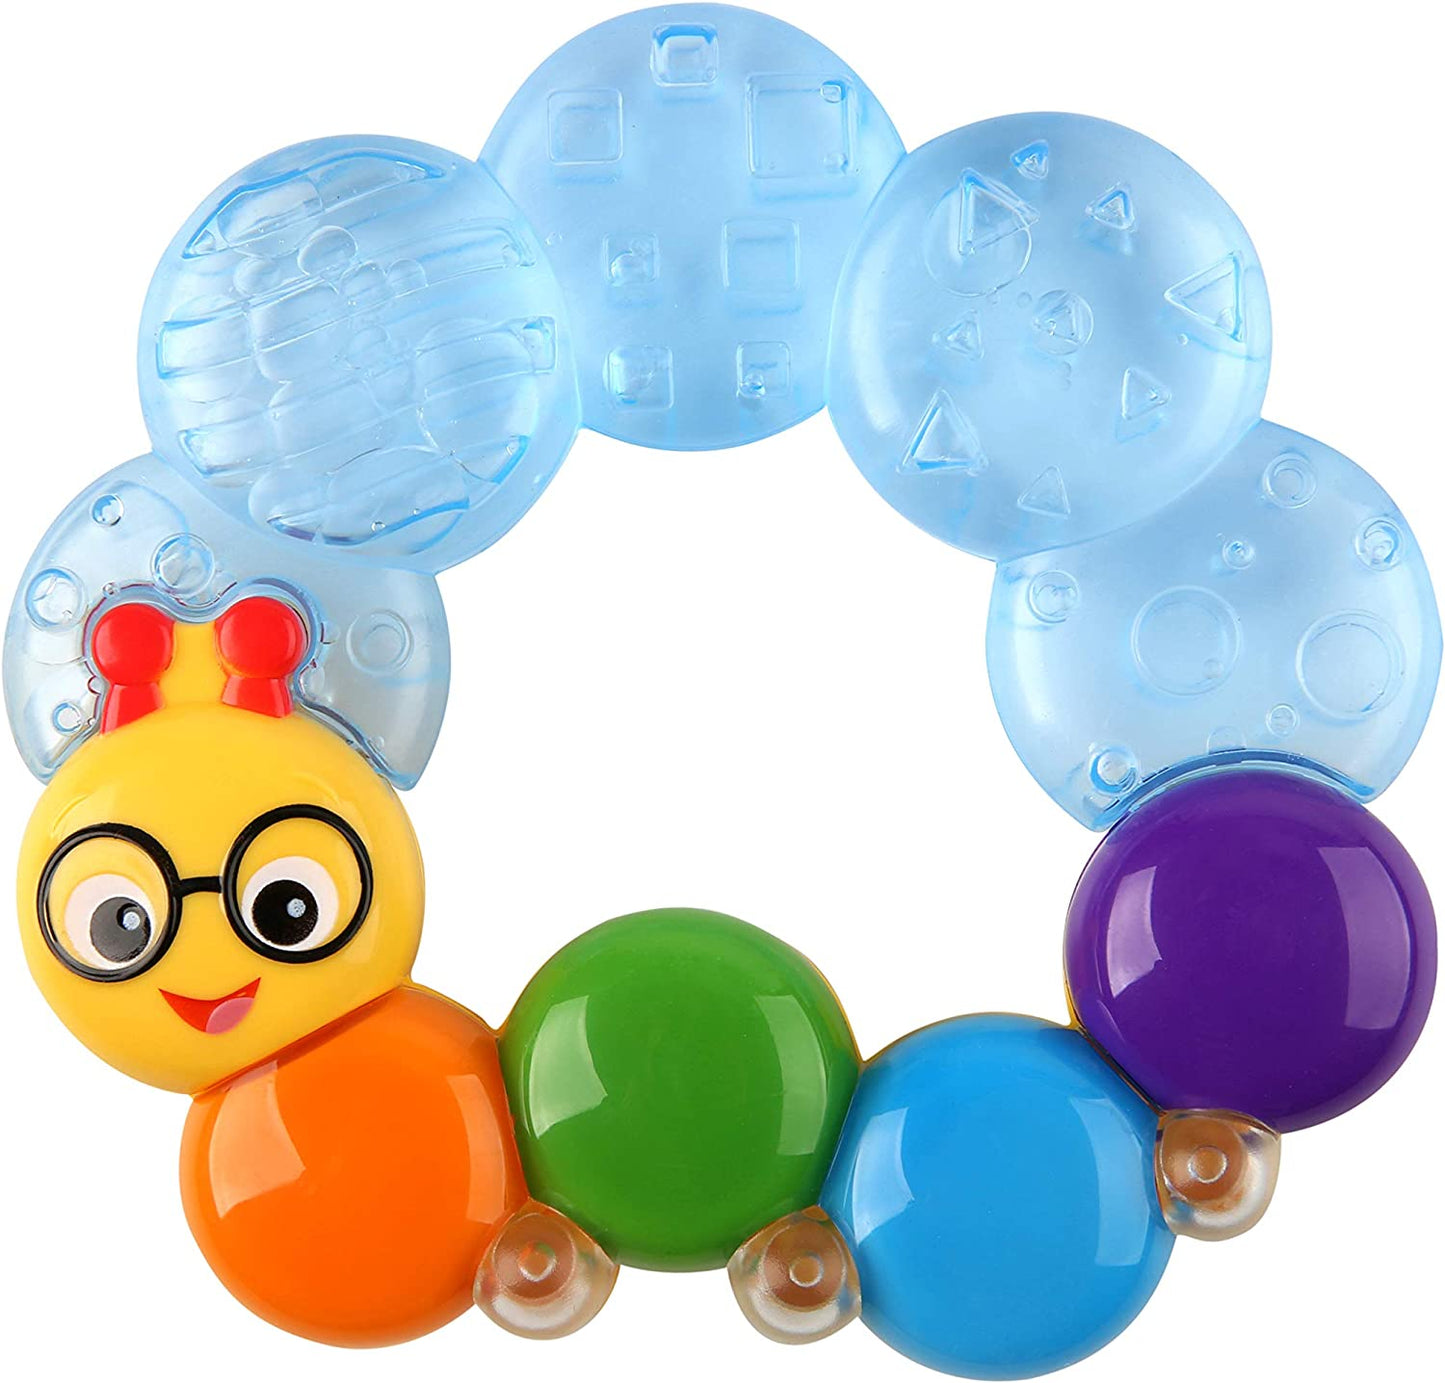 , Teether-Pillar Rattle and Chill Teething Aid Toy, Soothing Relief, Multisensory Stimulation, Massages Sore Gums, Easy to Hold, Water Filled, Ages 3 Months +